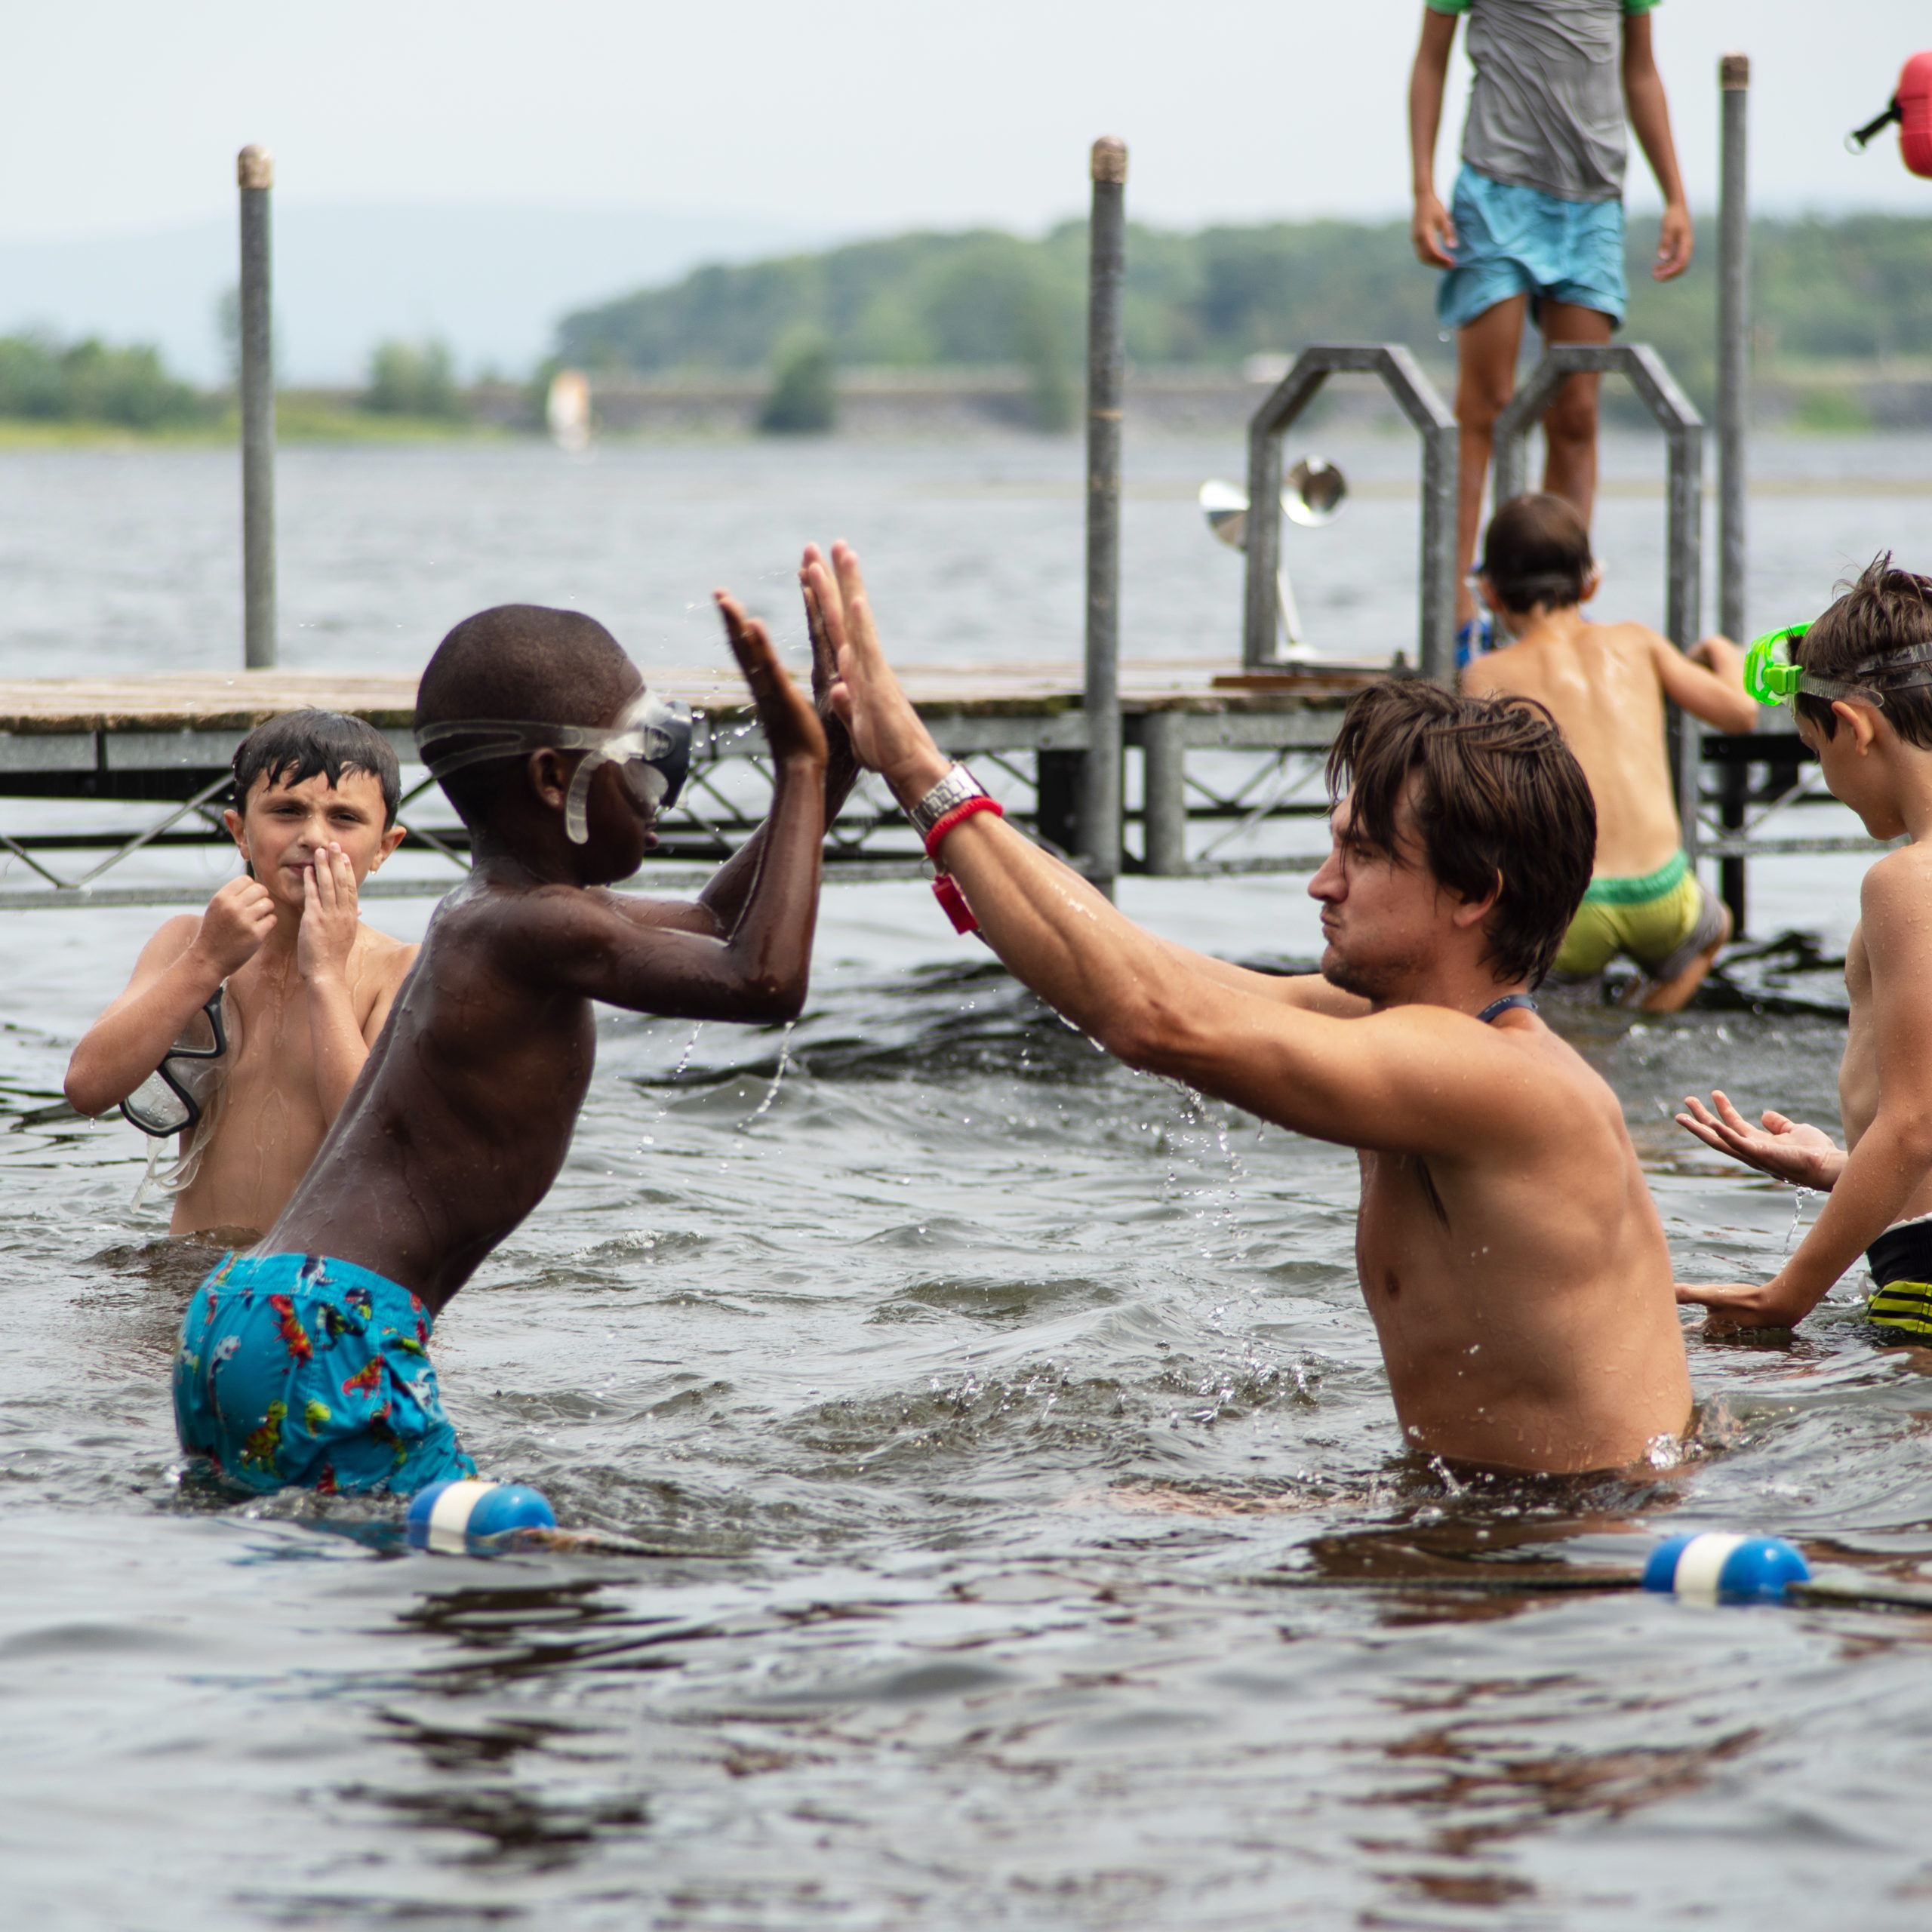 Counselor and campers playing in the lake